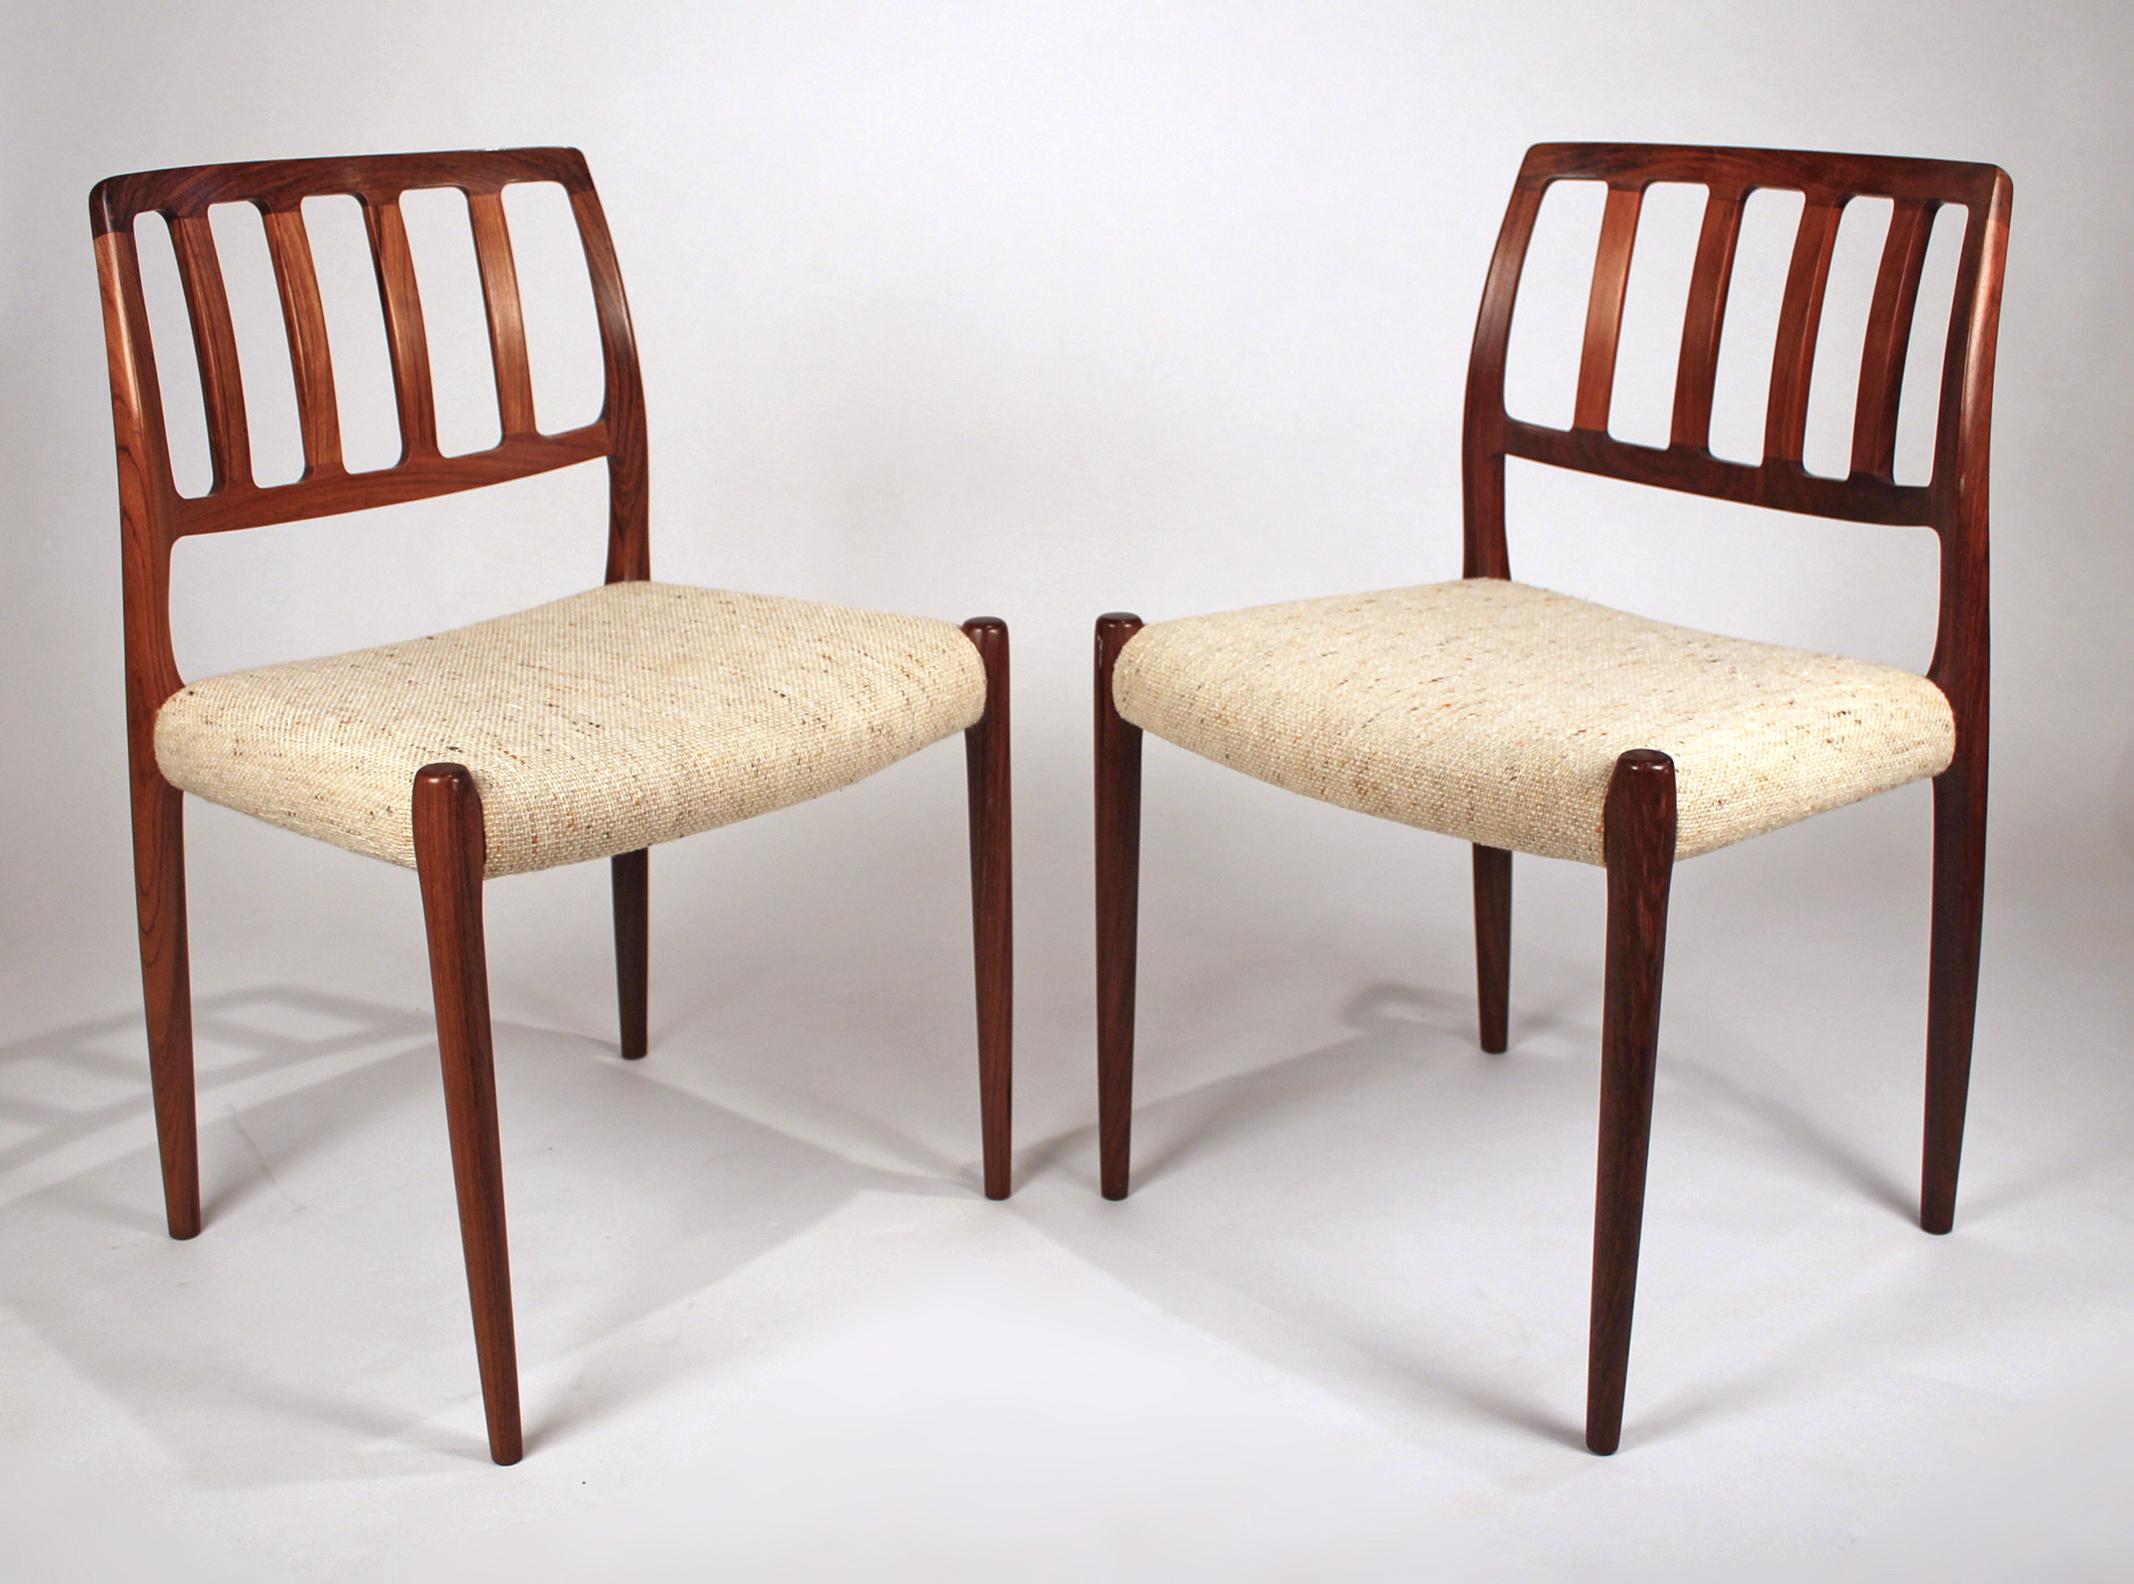 Set of Ten Dining Chairs in East Indian Rosewood by Niels Otto Moller 1